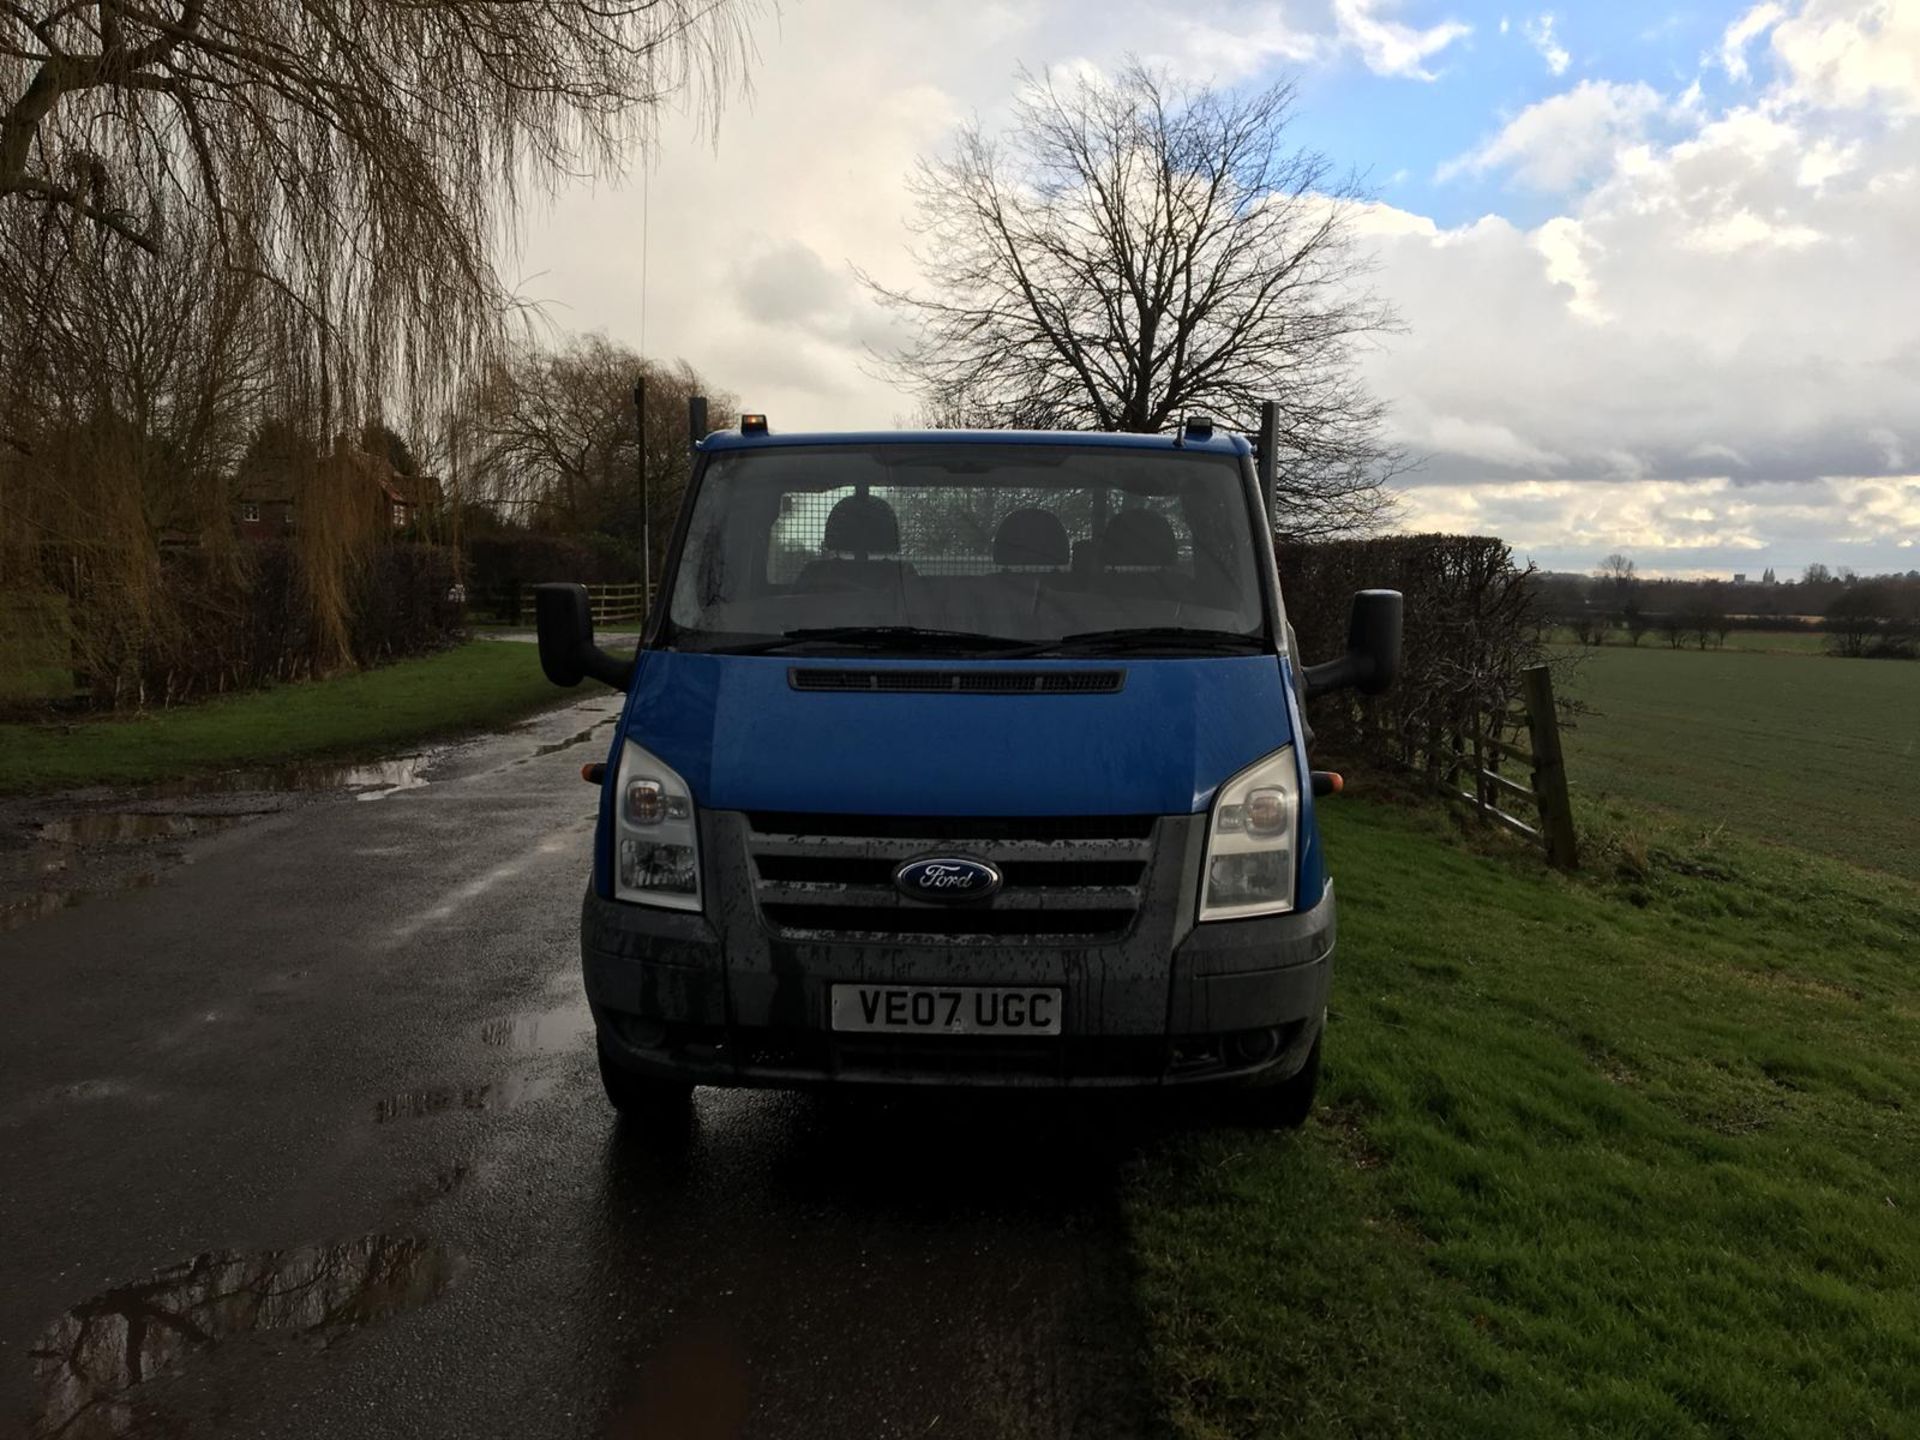 2007/07 REG FORD TRANSIT 115 T350L RWD DIESEL BLUE DROPSIDE LORRY WITH TAIL LIFT *NO VAT* - Image 2 of 10